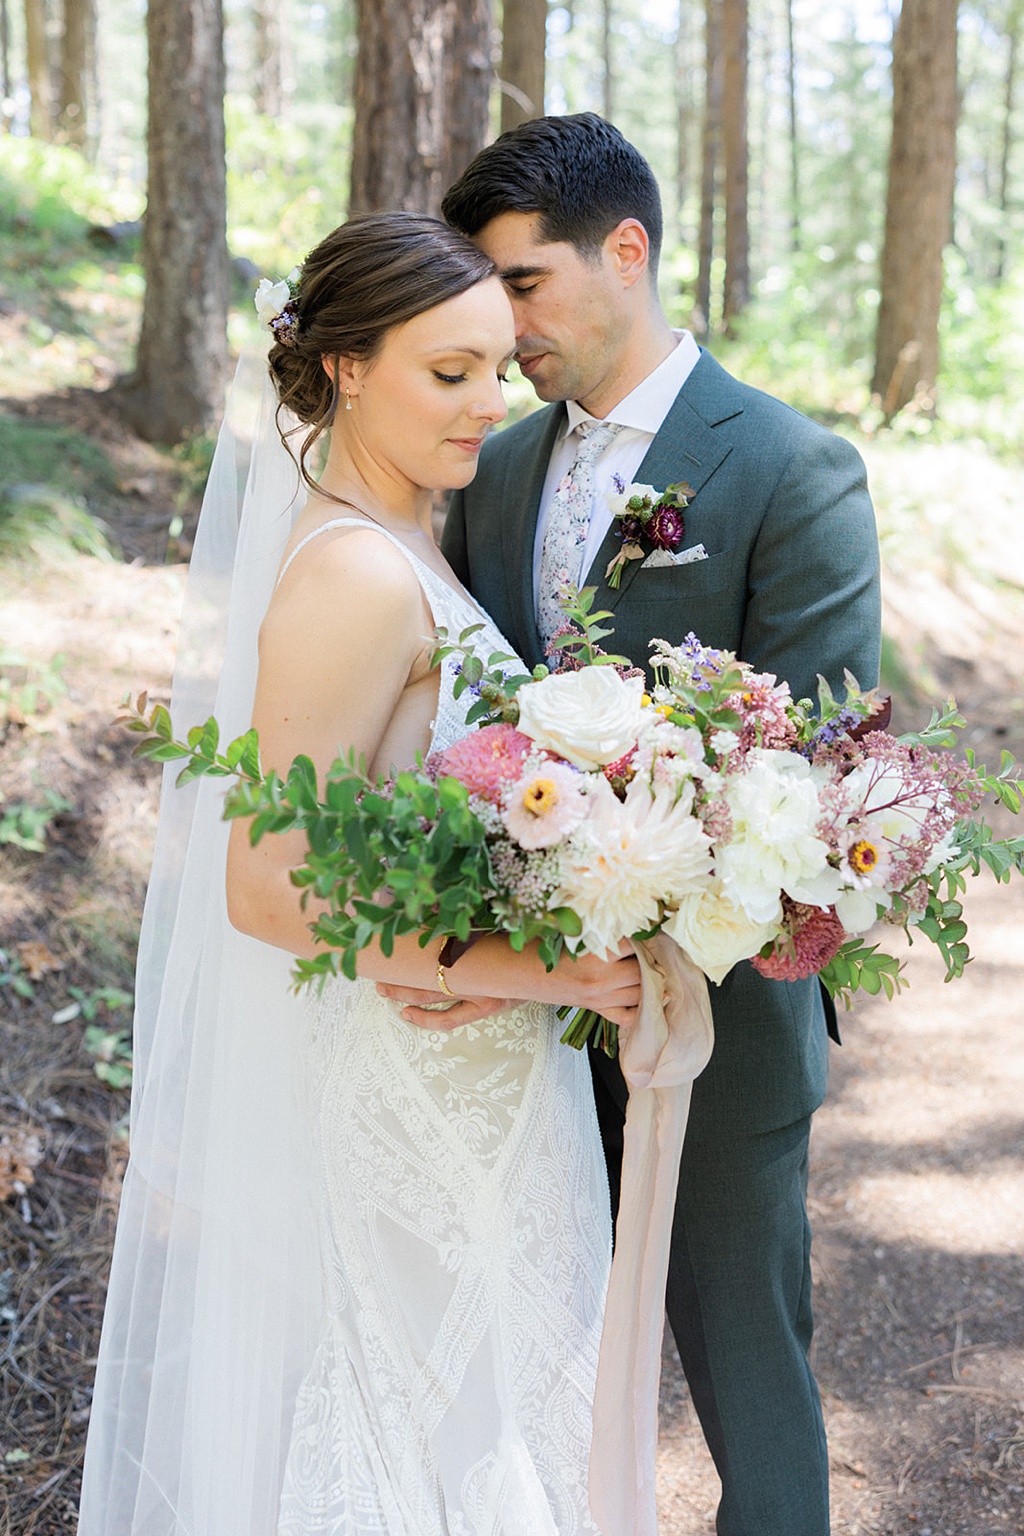 The bride and groom hold a bouquet in the forest for their Tierra Retreat Center wedding